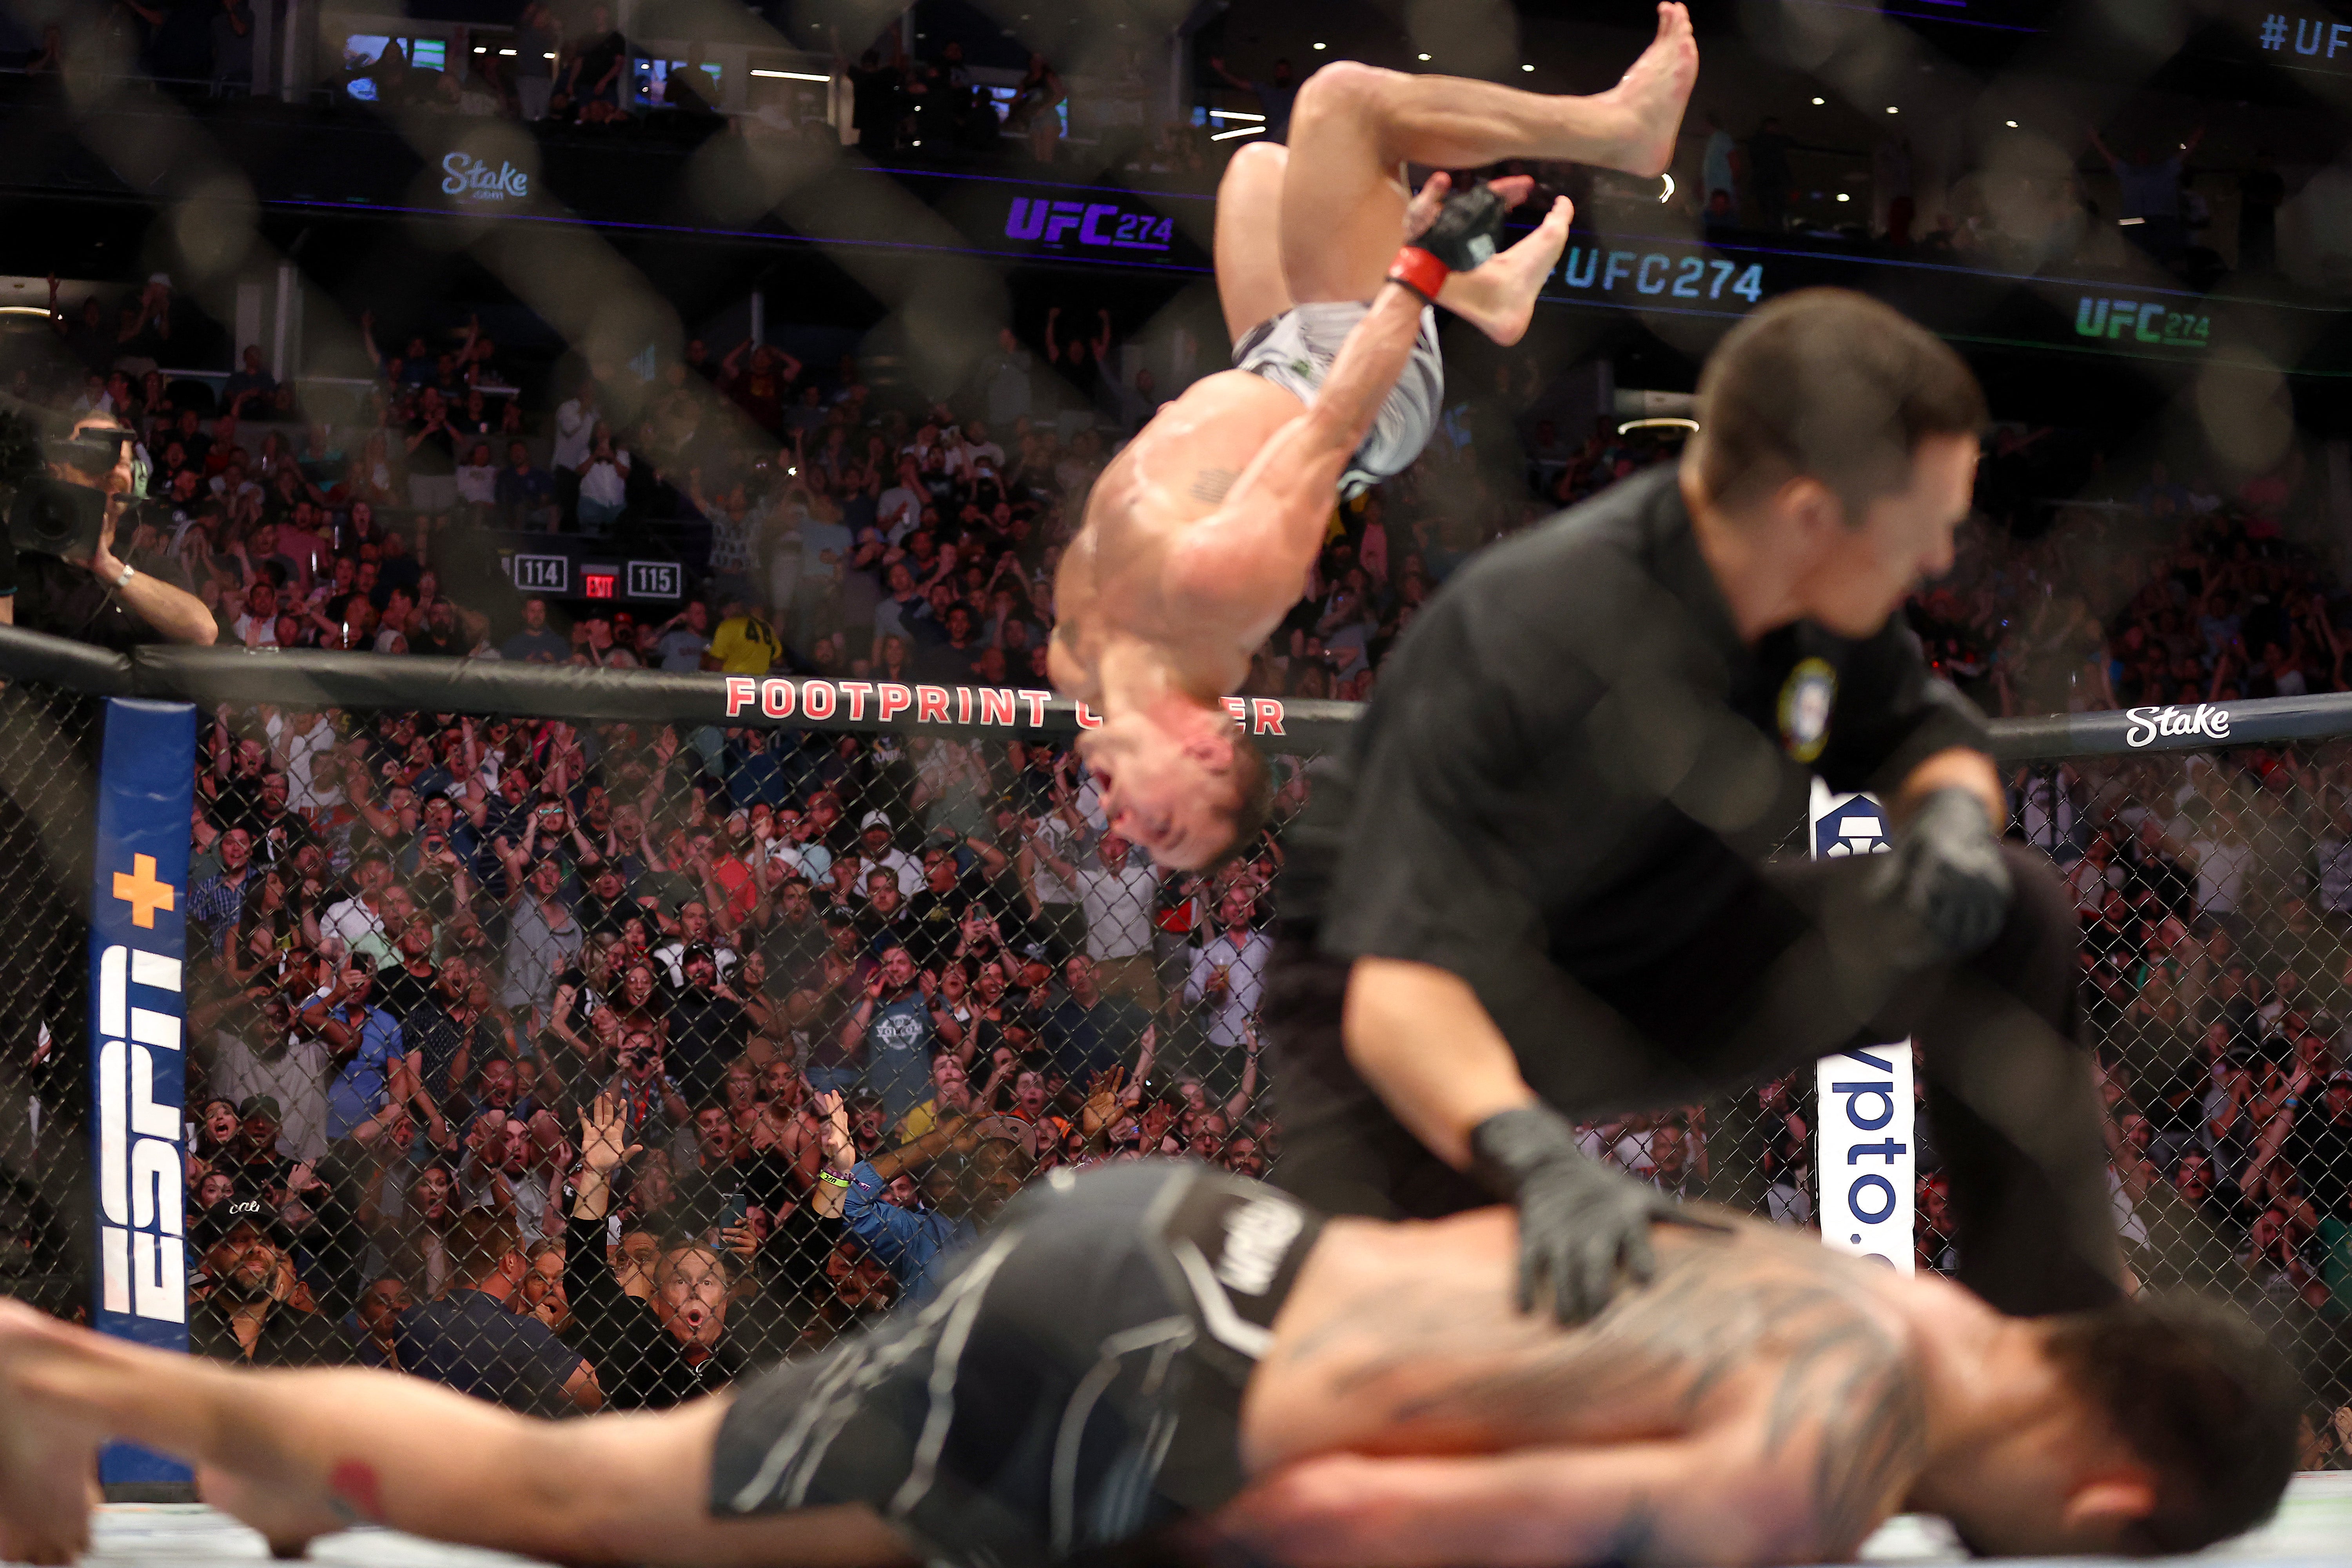 Michael Chandler recorded one of the greatest knockouts in UFC history against Ferguson